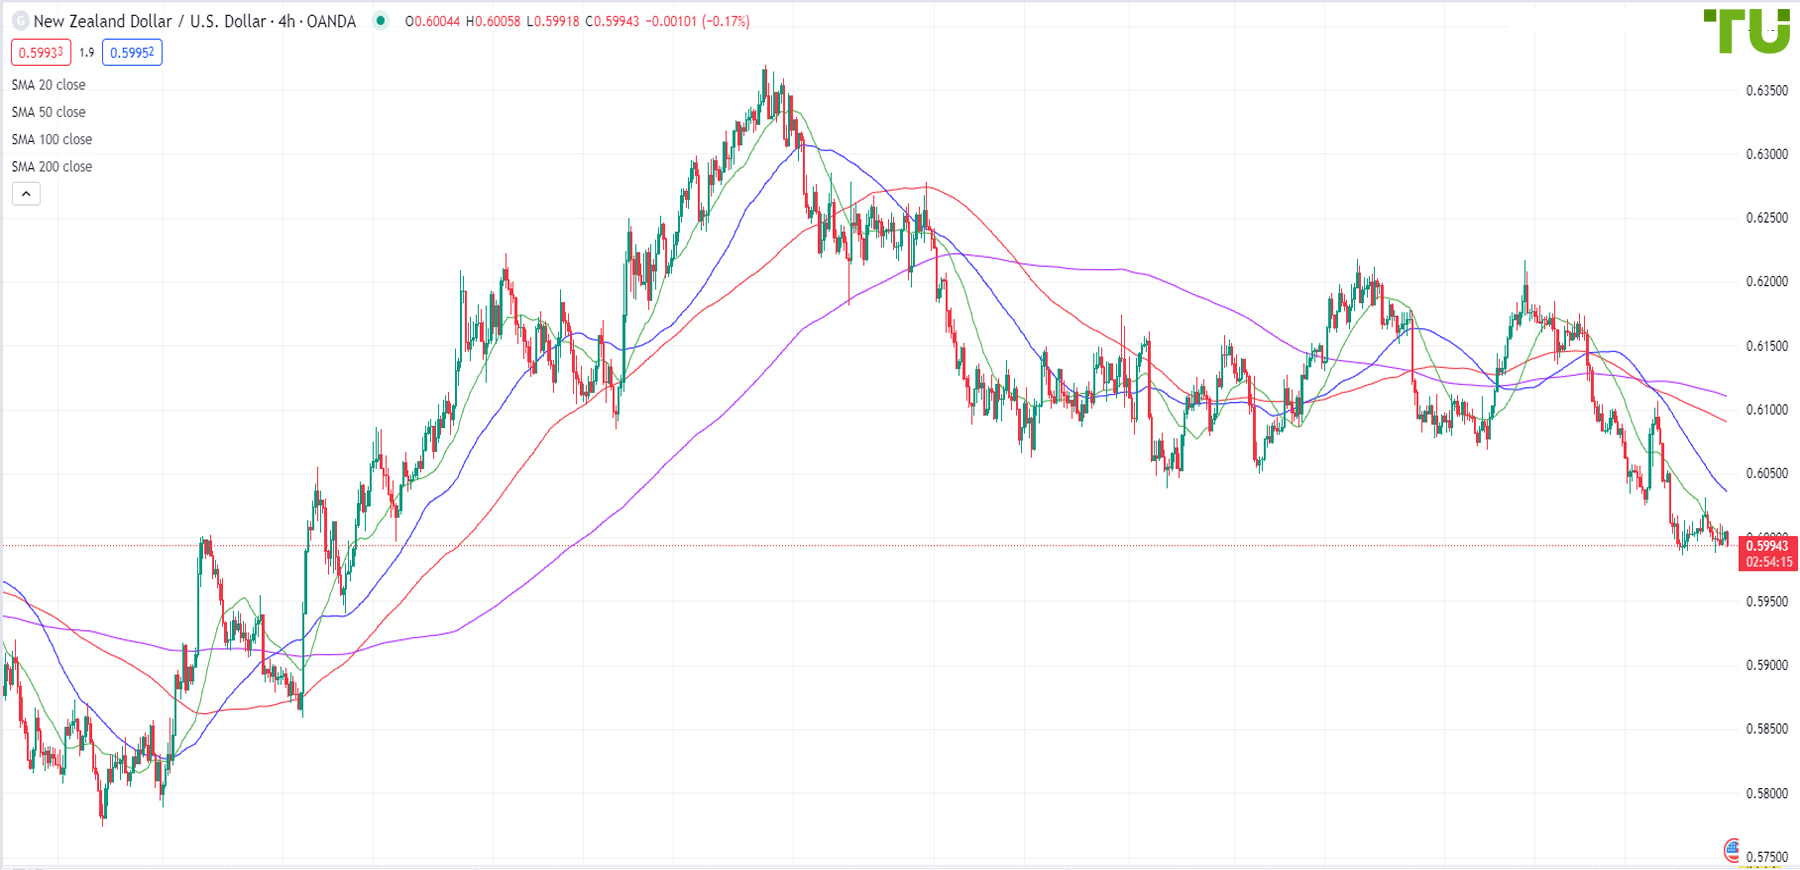 Kiwi/dollar remains in a vulnerable position